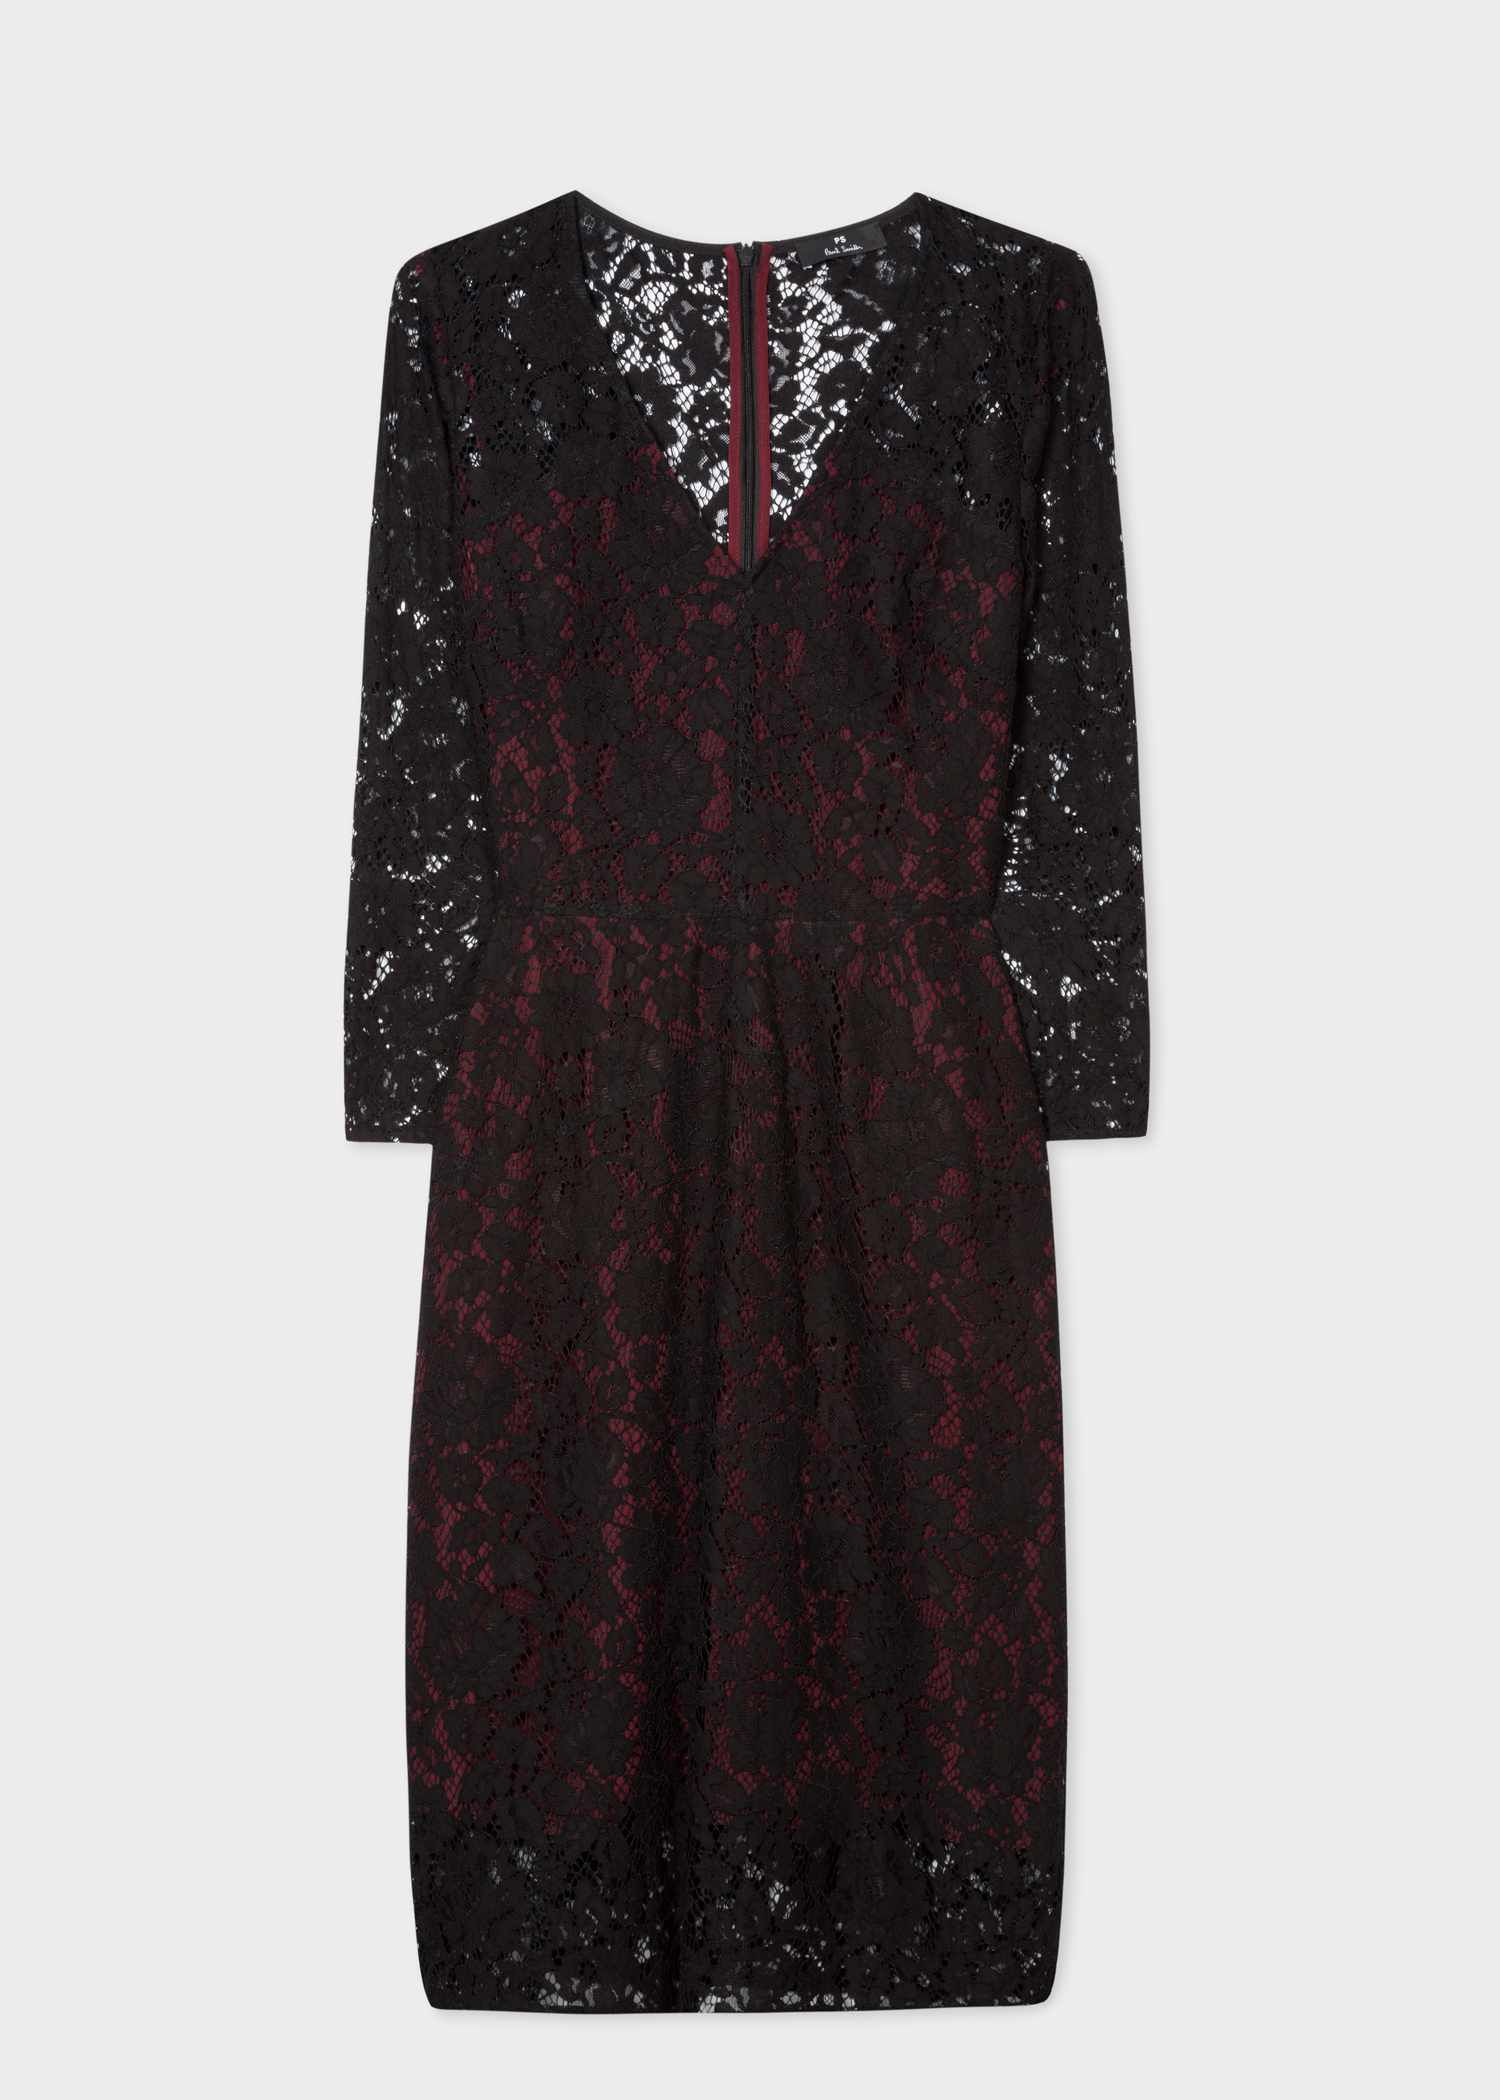 Front view - Women's Black Lace Dress With Contrasting Berry Lining Paul Smith